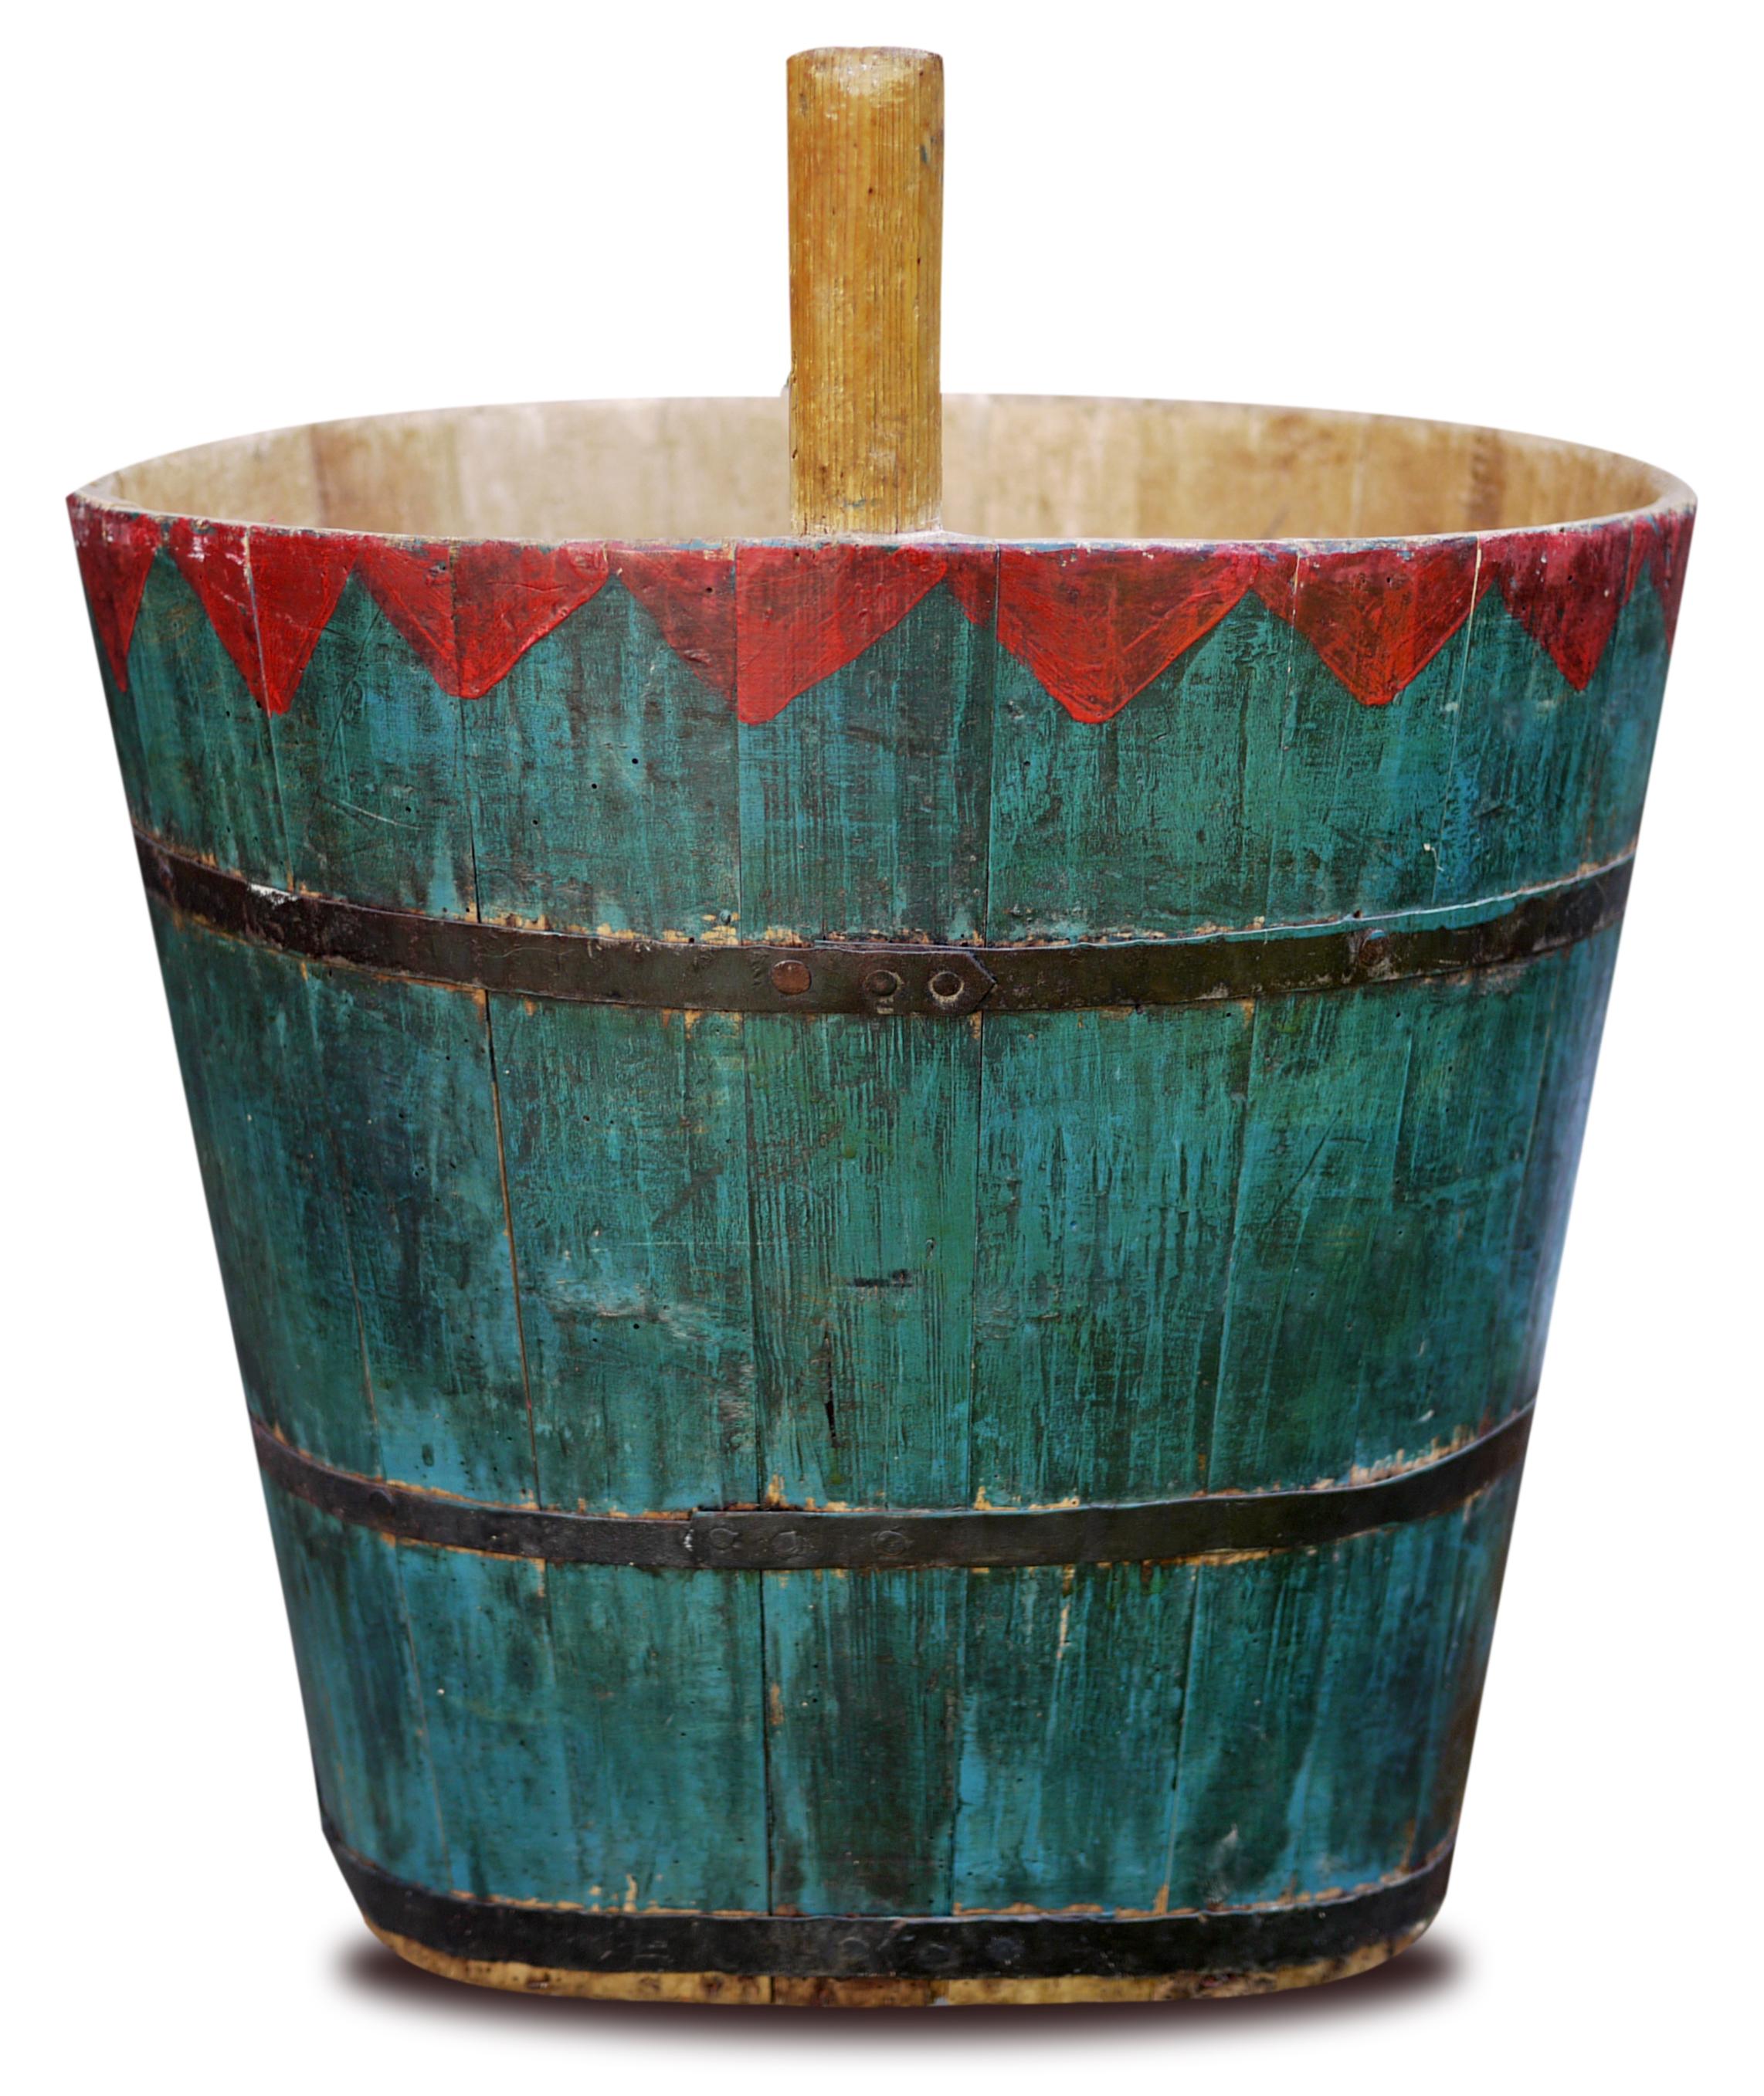 Original old painted alpine storage basket, hand decorated

Measures: Height 48 cm – Base diameter 39 cm – Top diameter 50 cm

Hand painted antique Tyrolean wooden tub. Entirely painted in a beautiful teal blue, on the edge it is decorated with